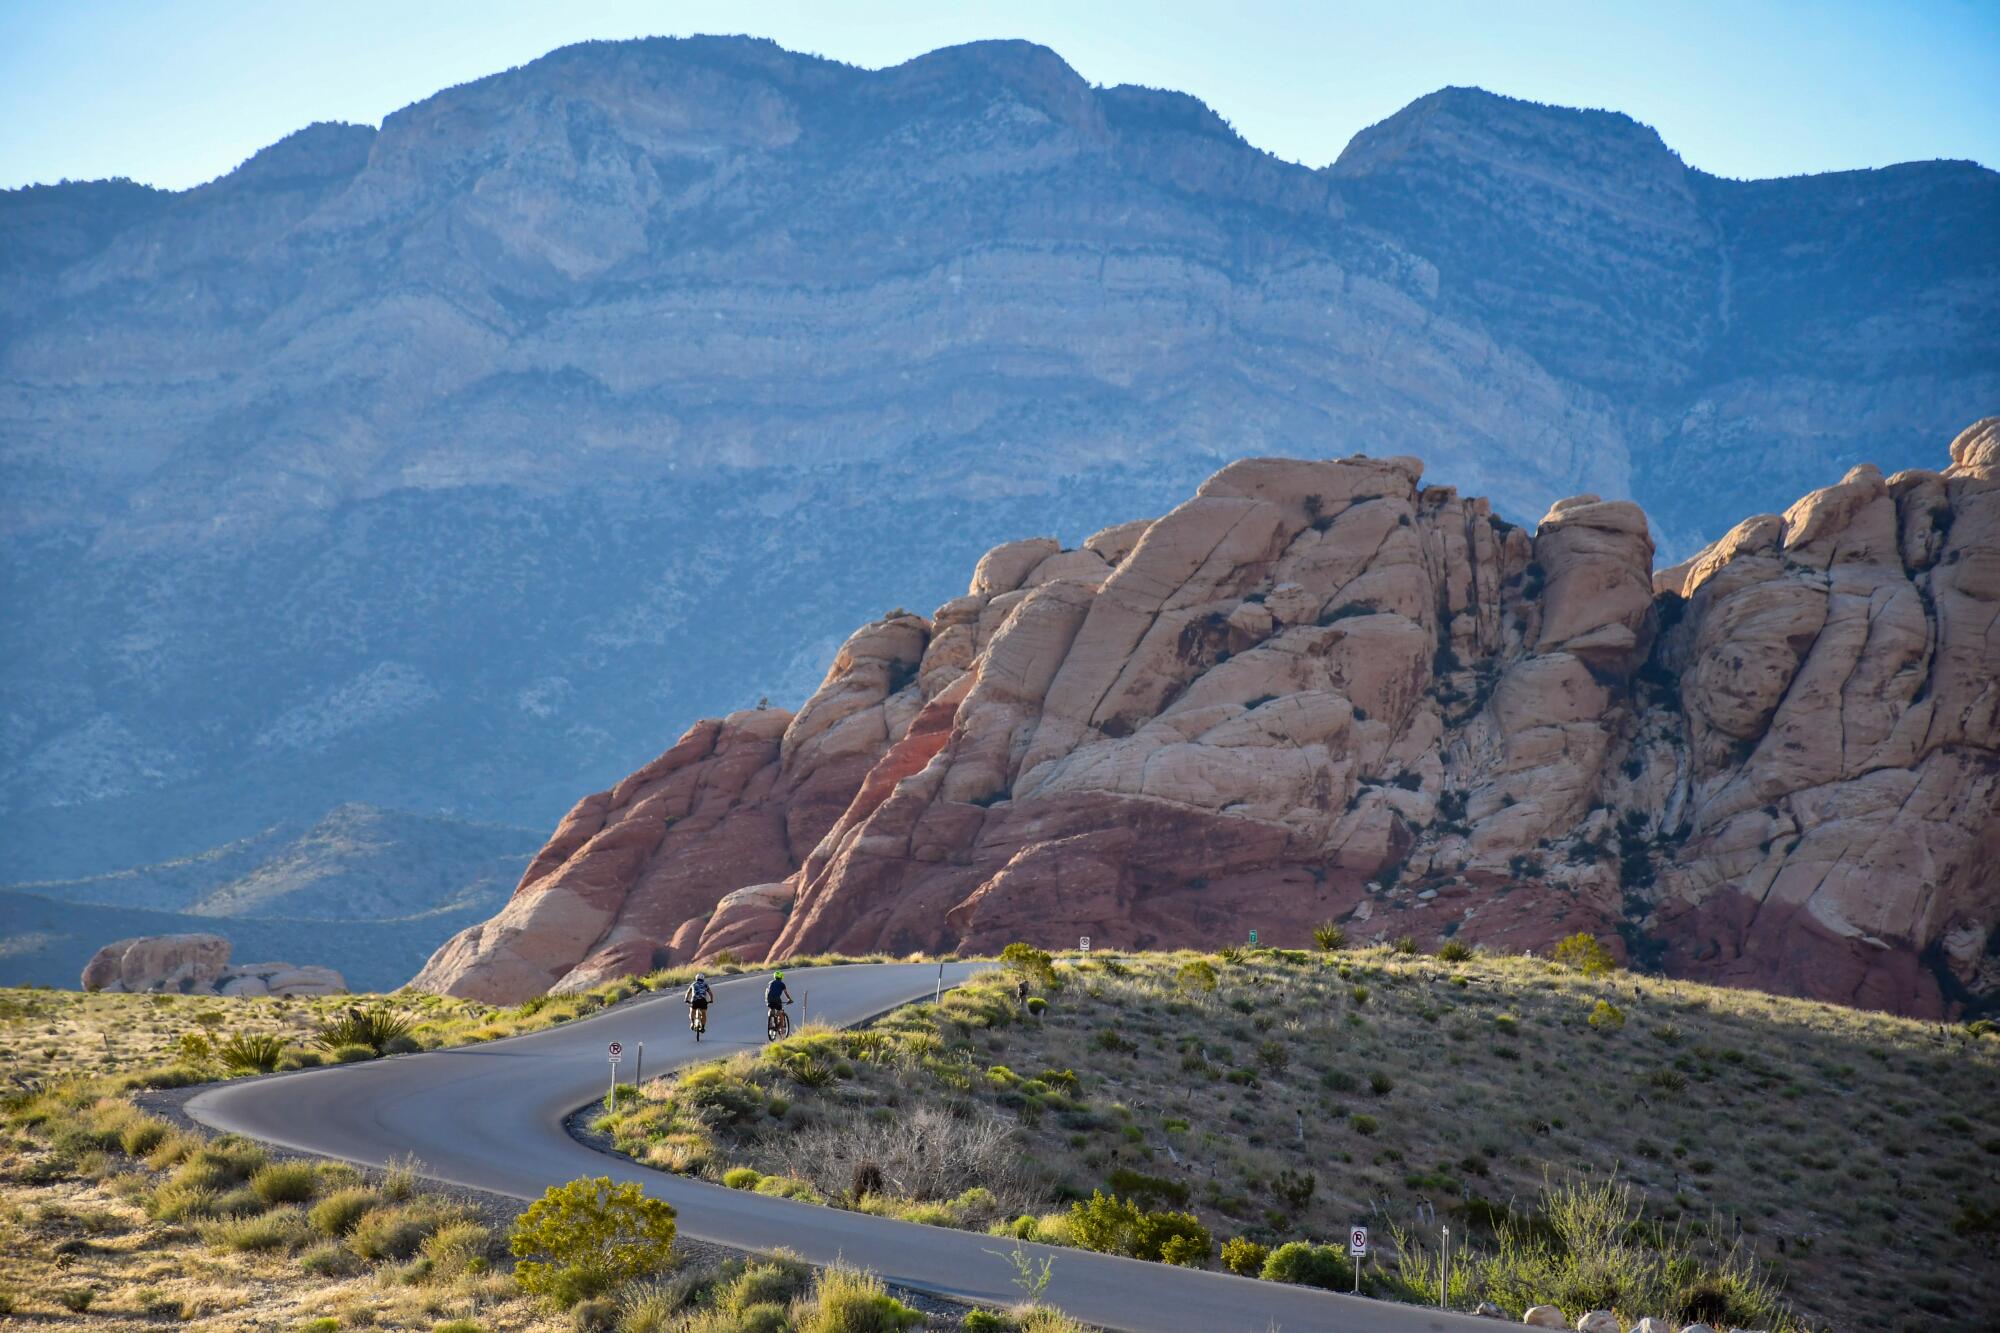 People bicycle on a road toward red rock hills, with larger hills in the distance